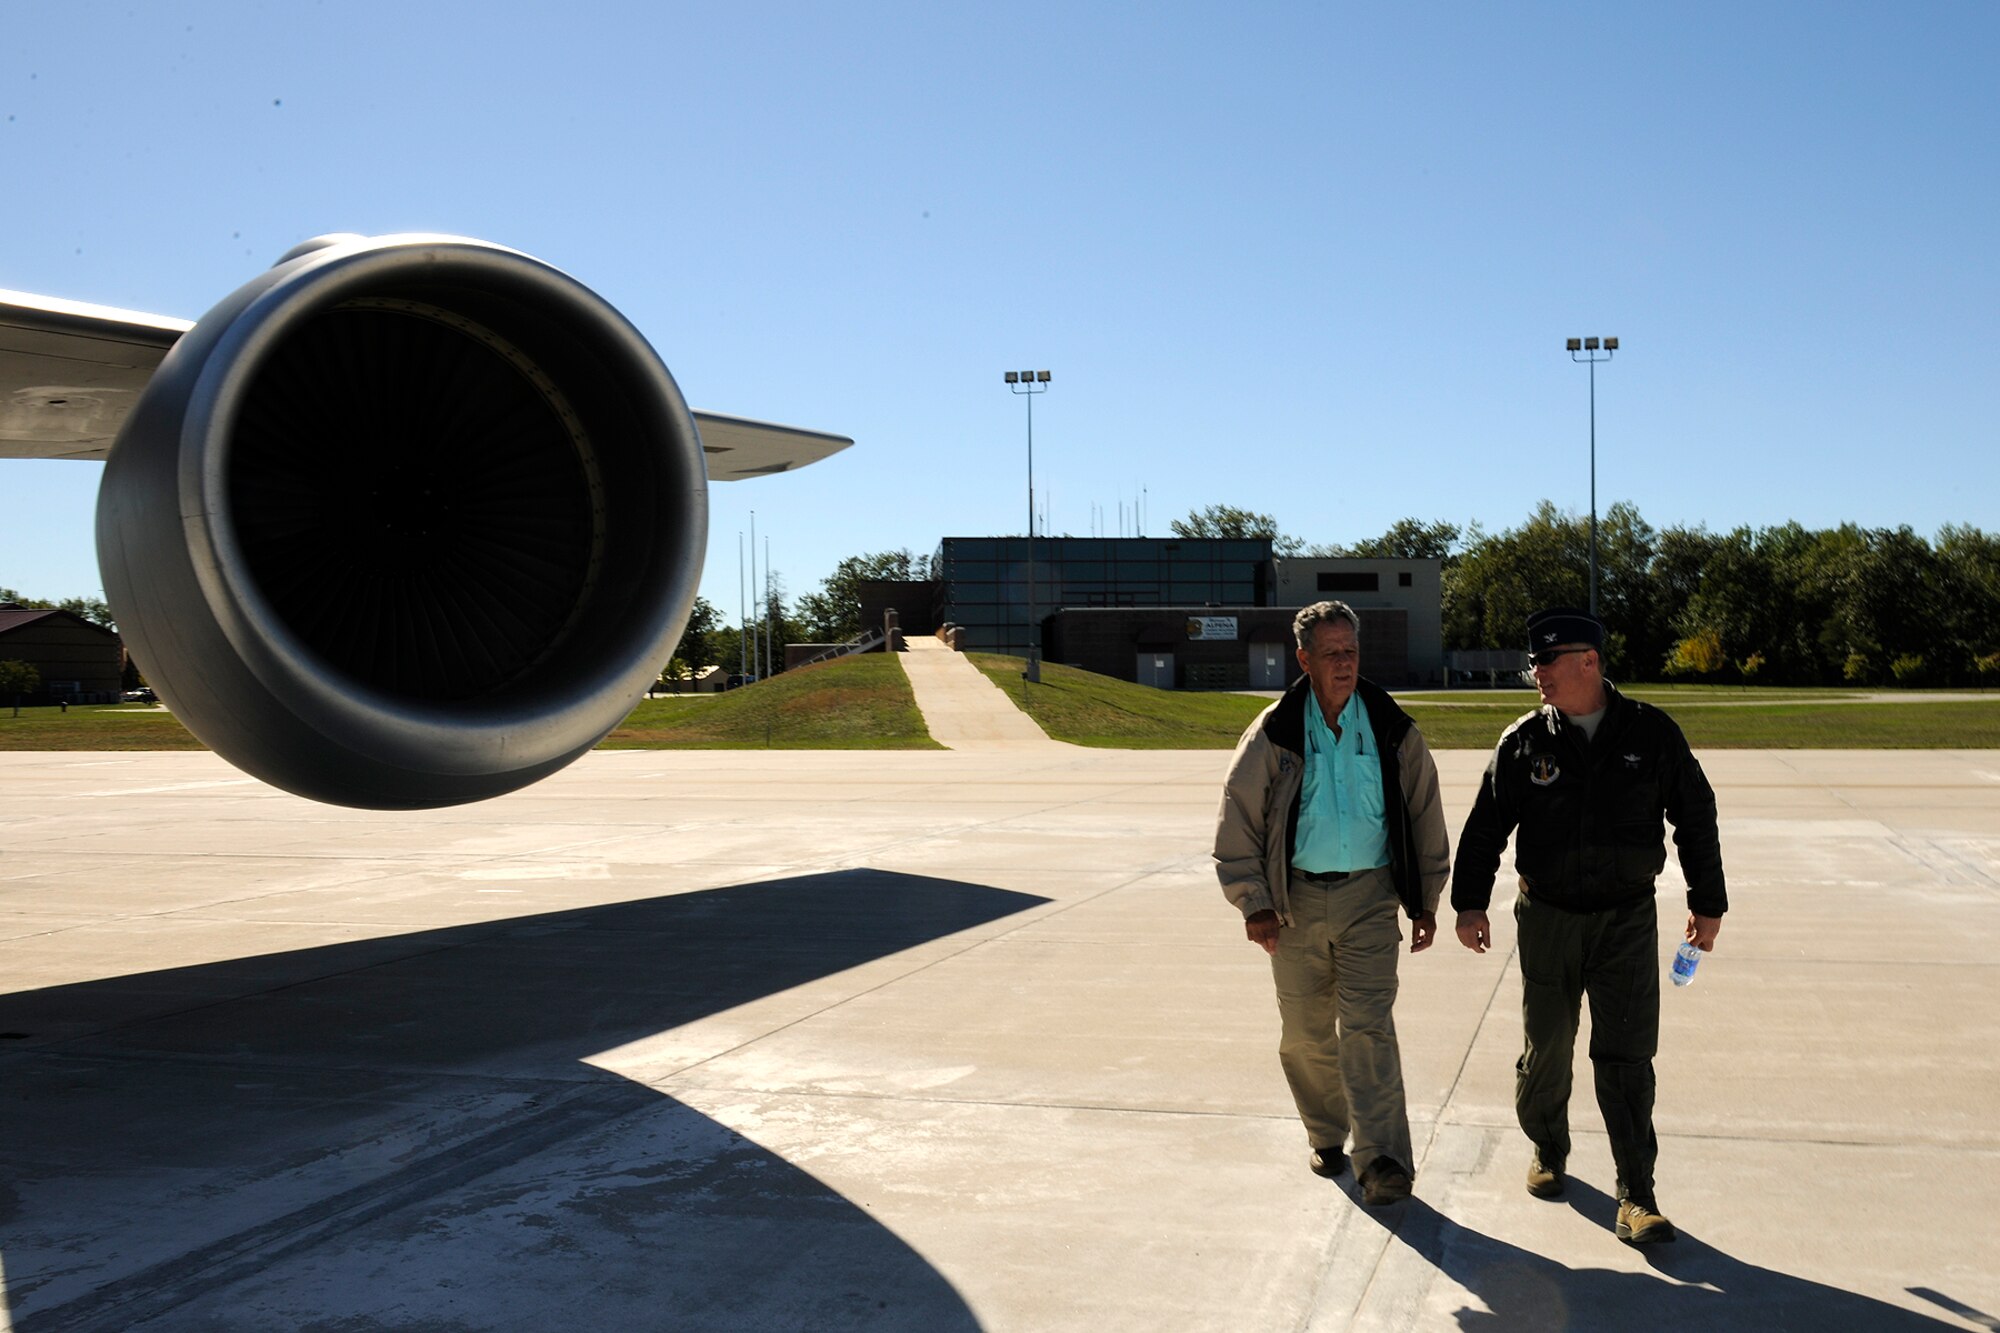 130913-Z-EZ686-419 – Lt. Gen. (ret.) Dennis McCarthy, chairman of the National Commission of the Structure of the Air Force, walks with Col. Michael Thomas, command of the 127th Wing, as they prepare to board a KC-135 Stratotanker at the Alpena Combat Readiness Training Center in Alpena, Mich., Sept. 13, 2013. McCarthy visited Alpena and Selfridge Air National Guard Base during a visit by the commission to examine Air National Guard operations. (U.S. Air National Guard photo by MSgt. David Kujawa/Released)